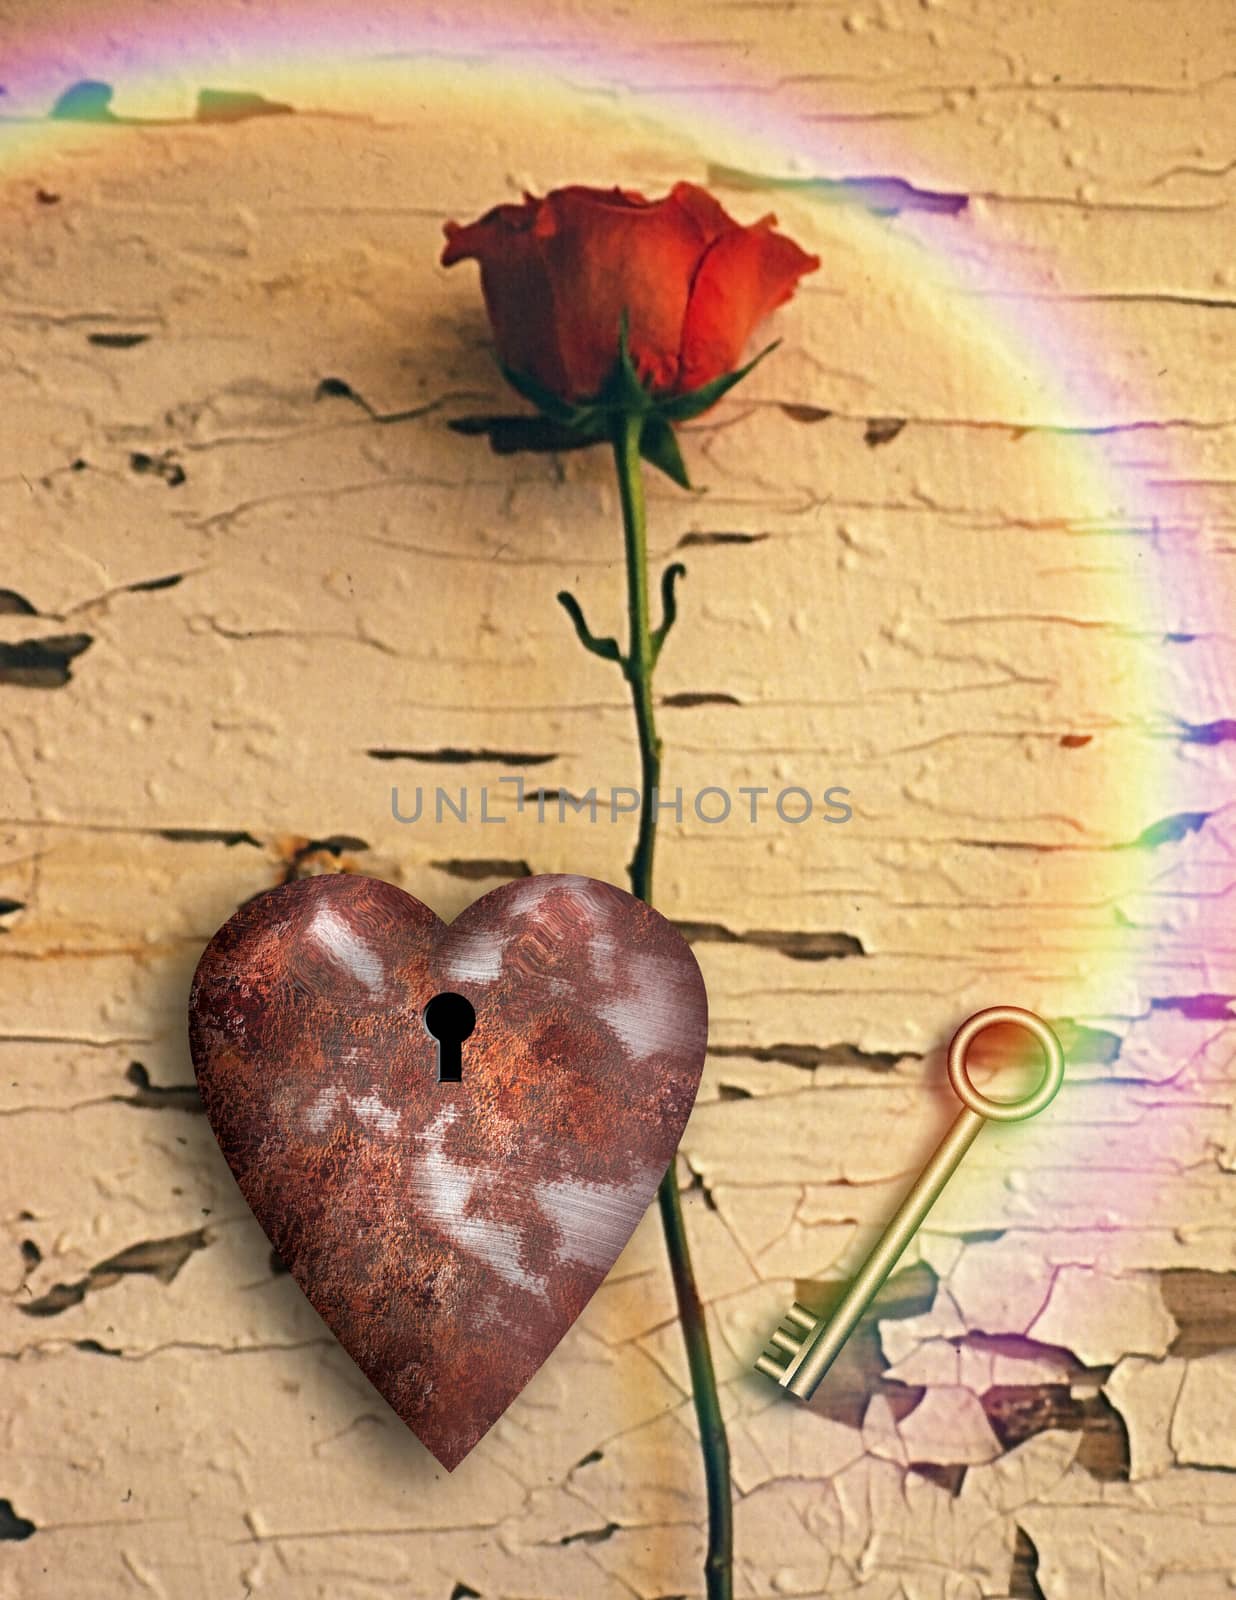 Red rose and rusted heart with keyhole. Golden key